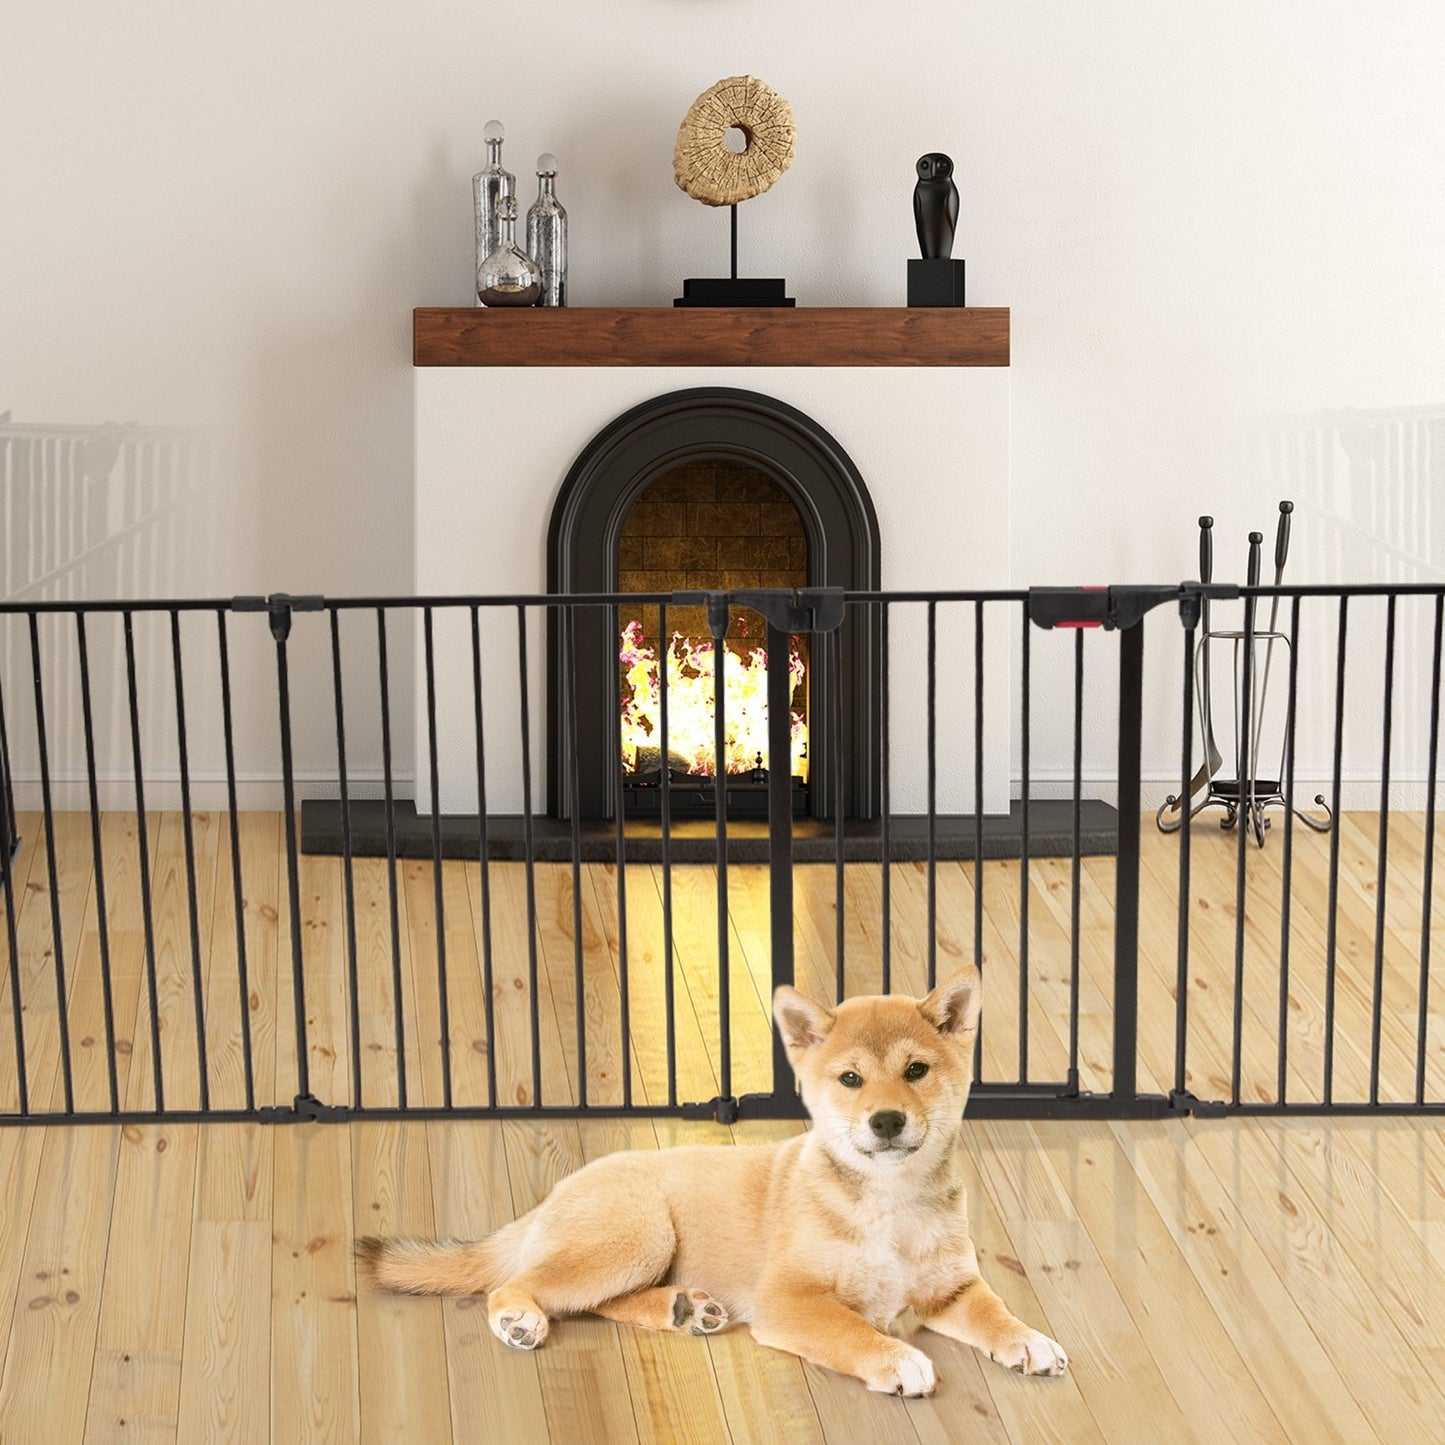 Adjustable Panel Baby Safe Metal Gate Play Yard, Black at Gallery Canada